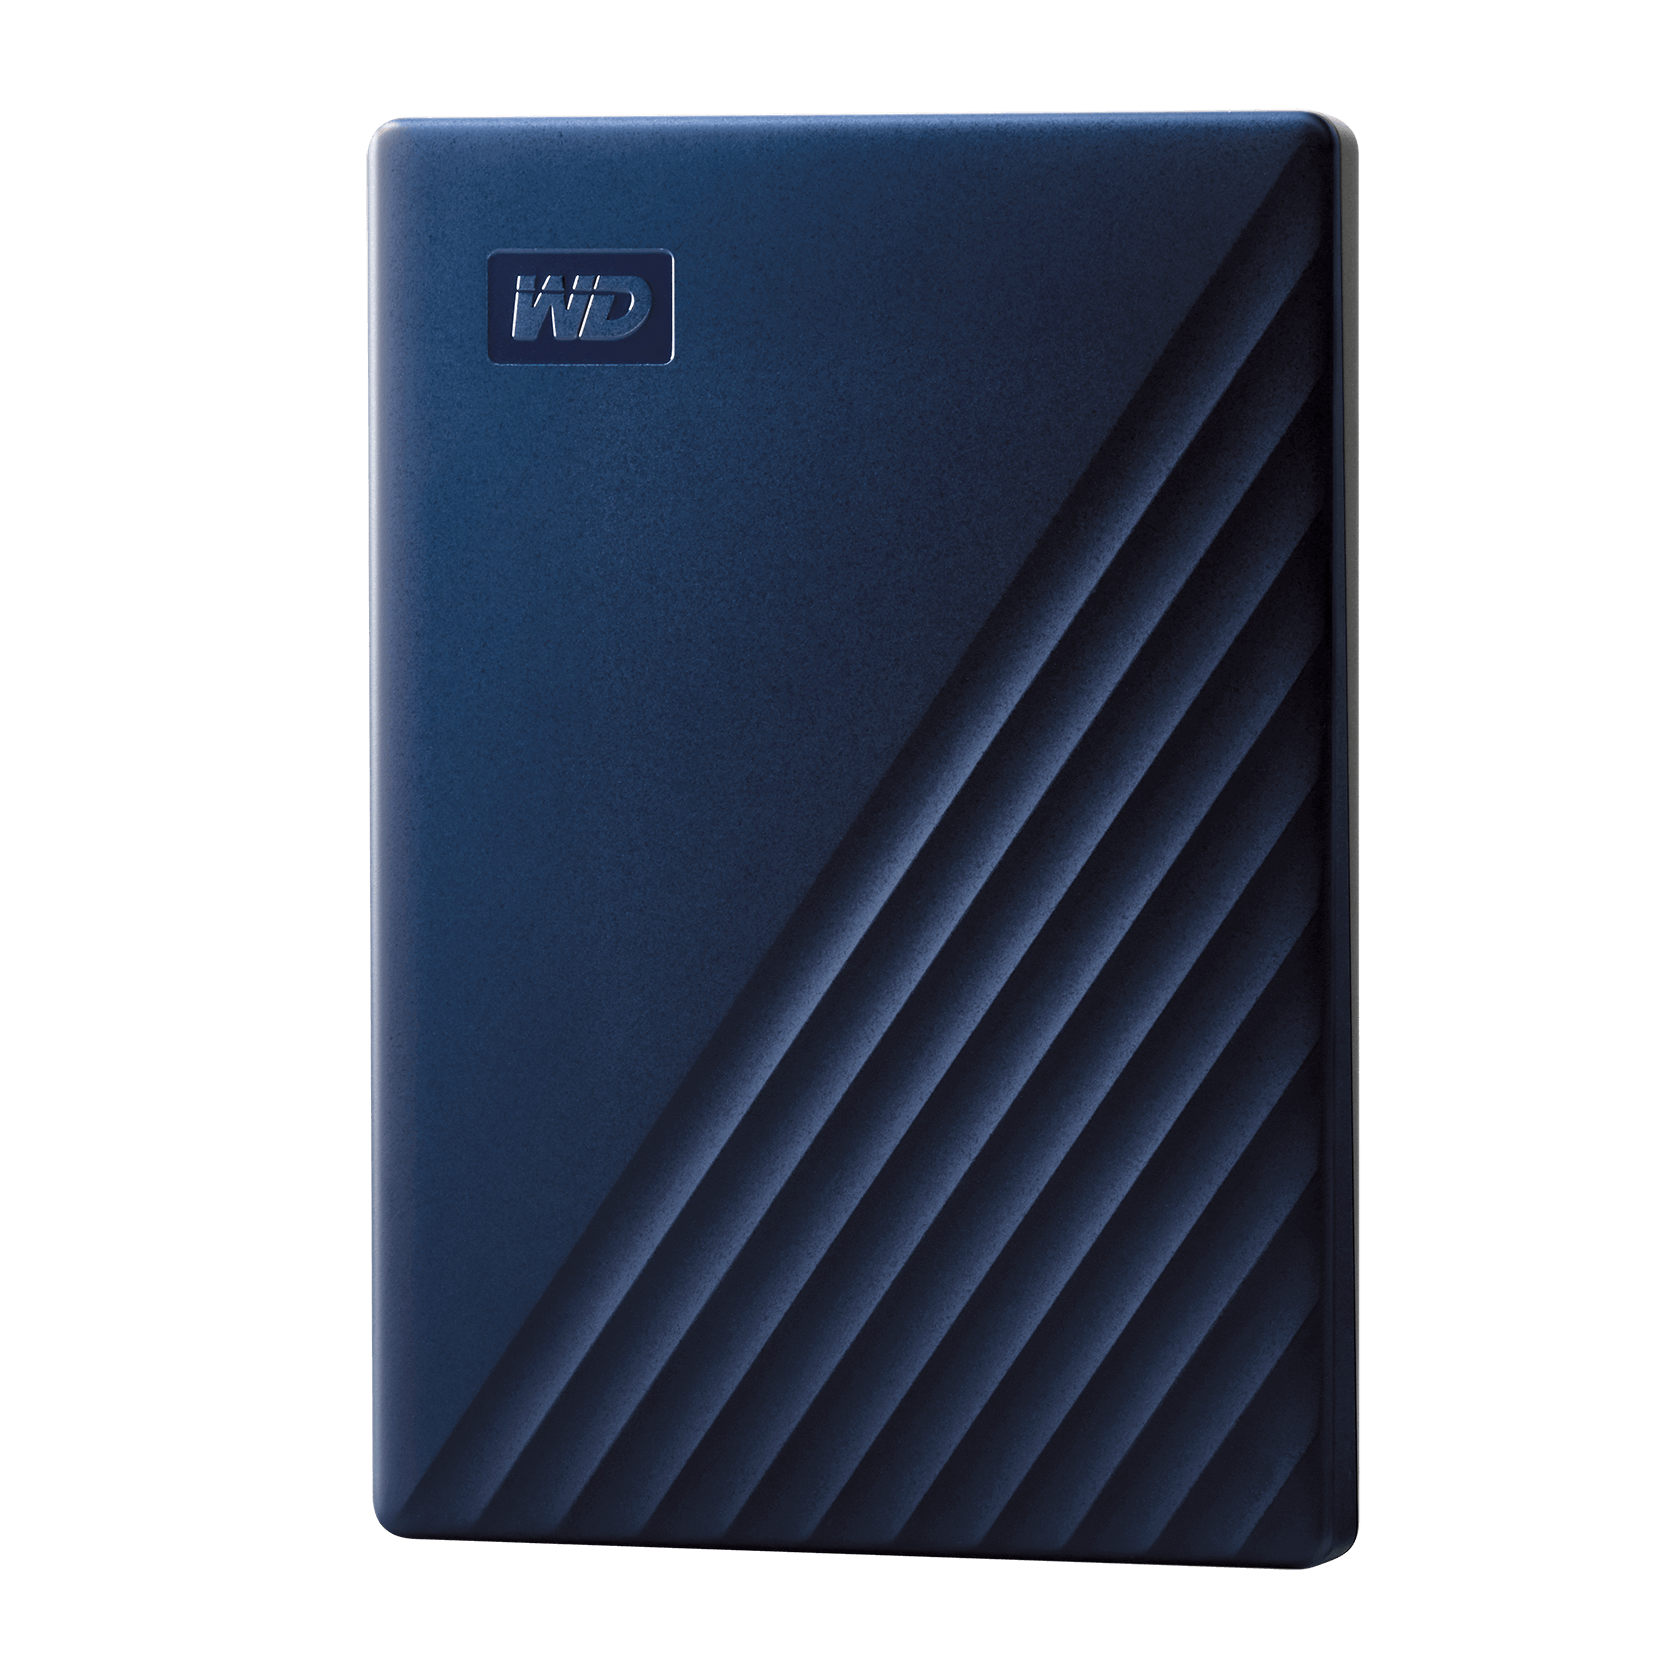 WD 2TB My Passport for Mac, Portable External Hard Drive, Blue - WDBA2D0020BBL-WESN - image 1 of 8